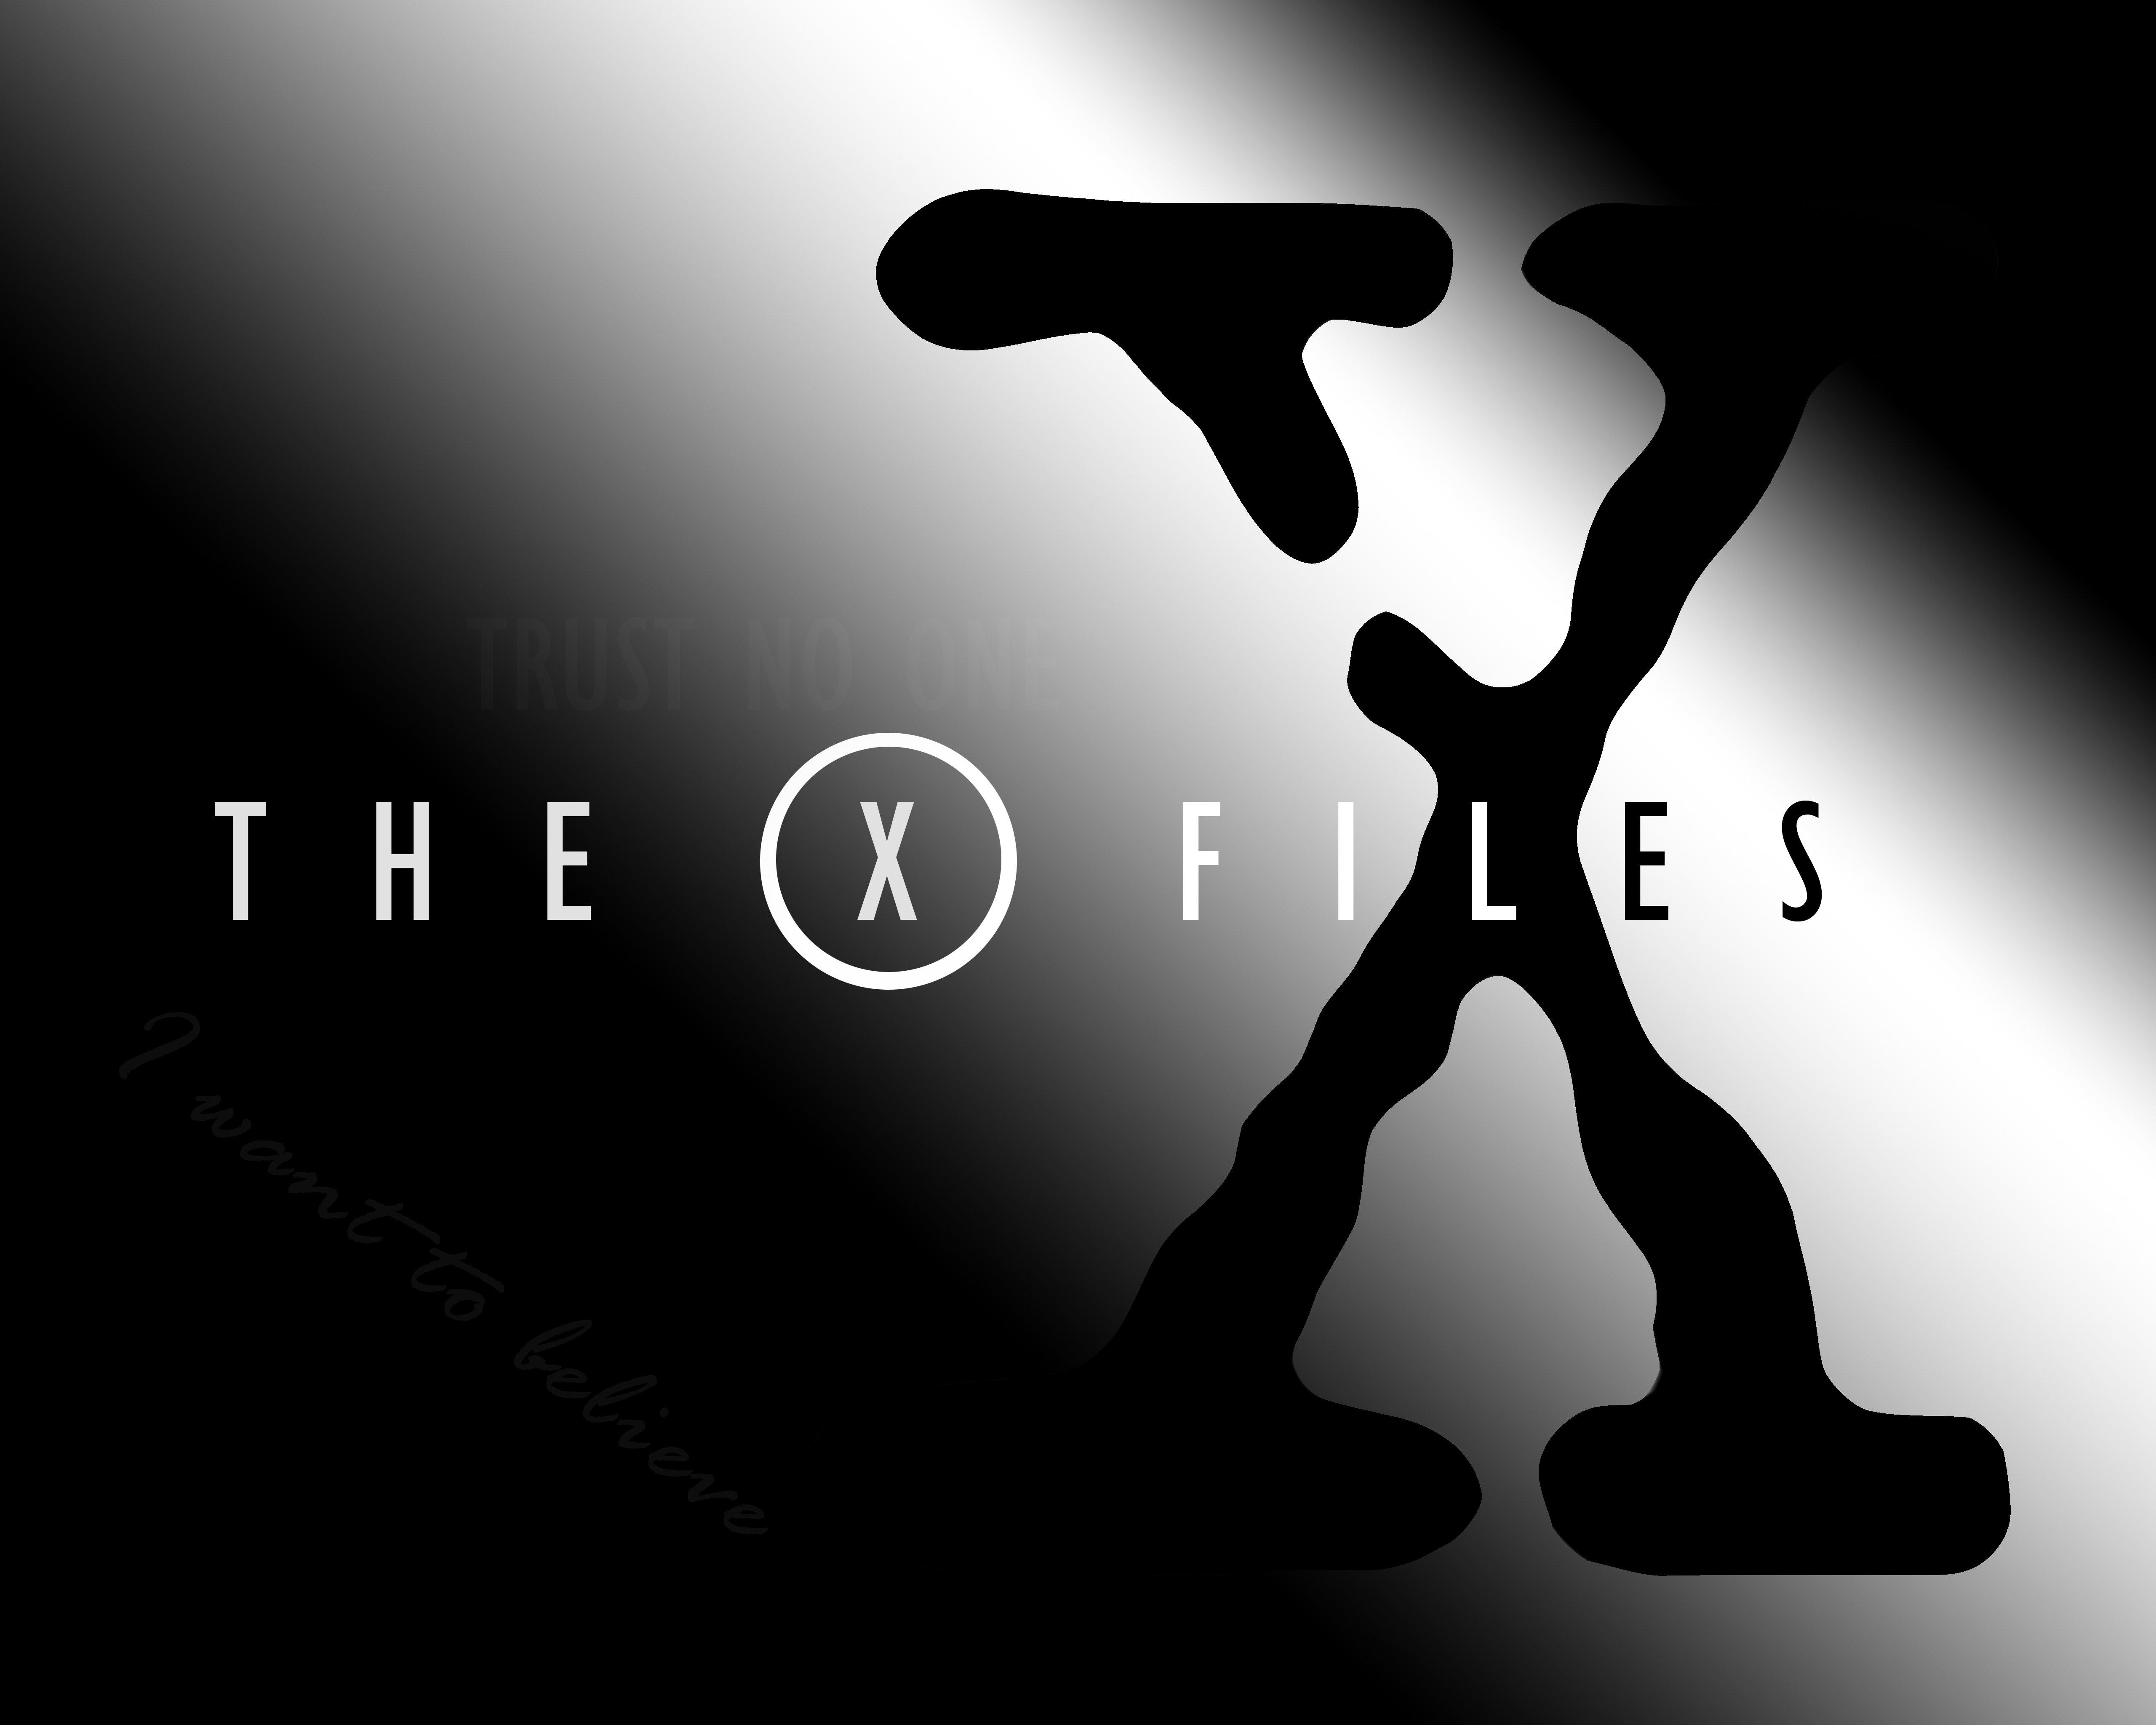 THE X FILES Sci Fi Mystery Drama Television Files Series Poster Wallpaperx4096